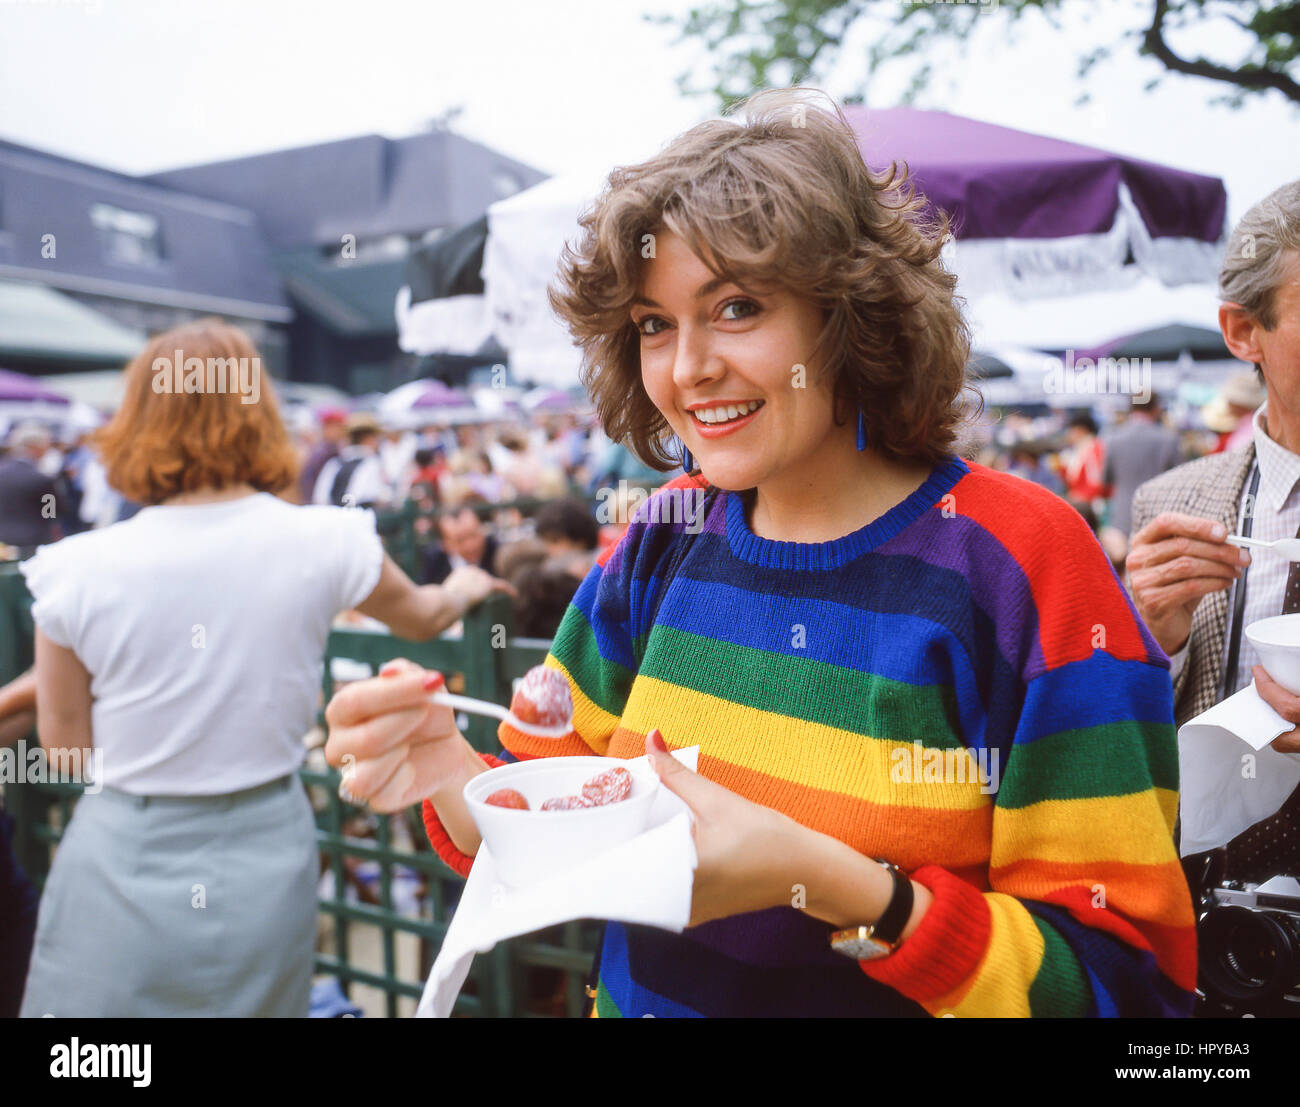 Young woman eating strawberries and cream at The Championships, Wimbledon, London Borough of Merton, Greater London, England, United Kingdom Stock Photo